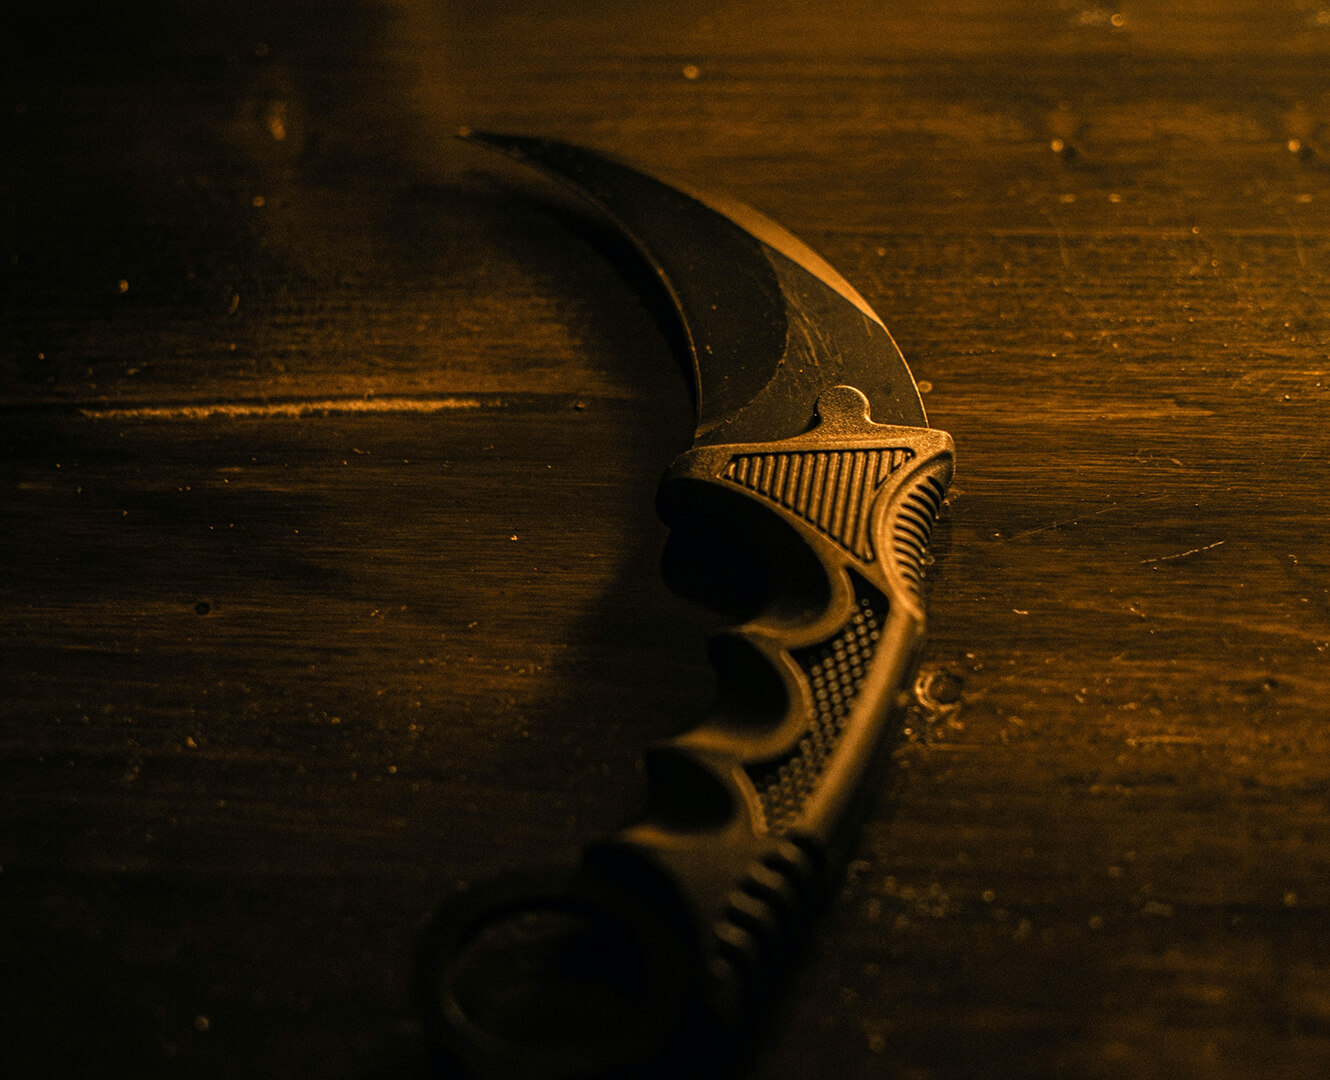 A knife sits on a wood table in a dark room